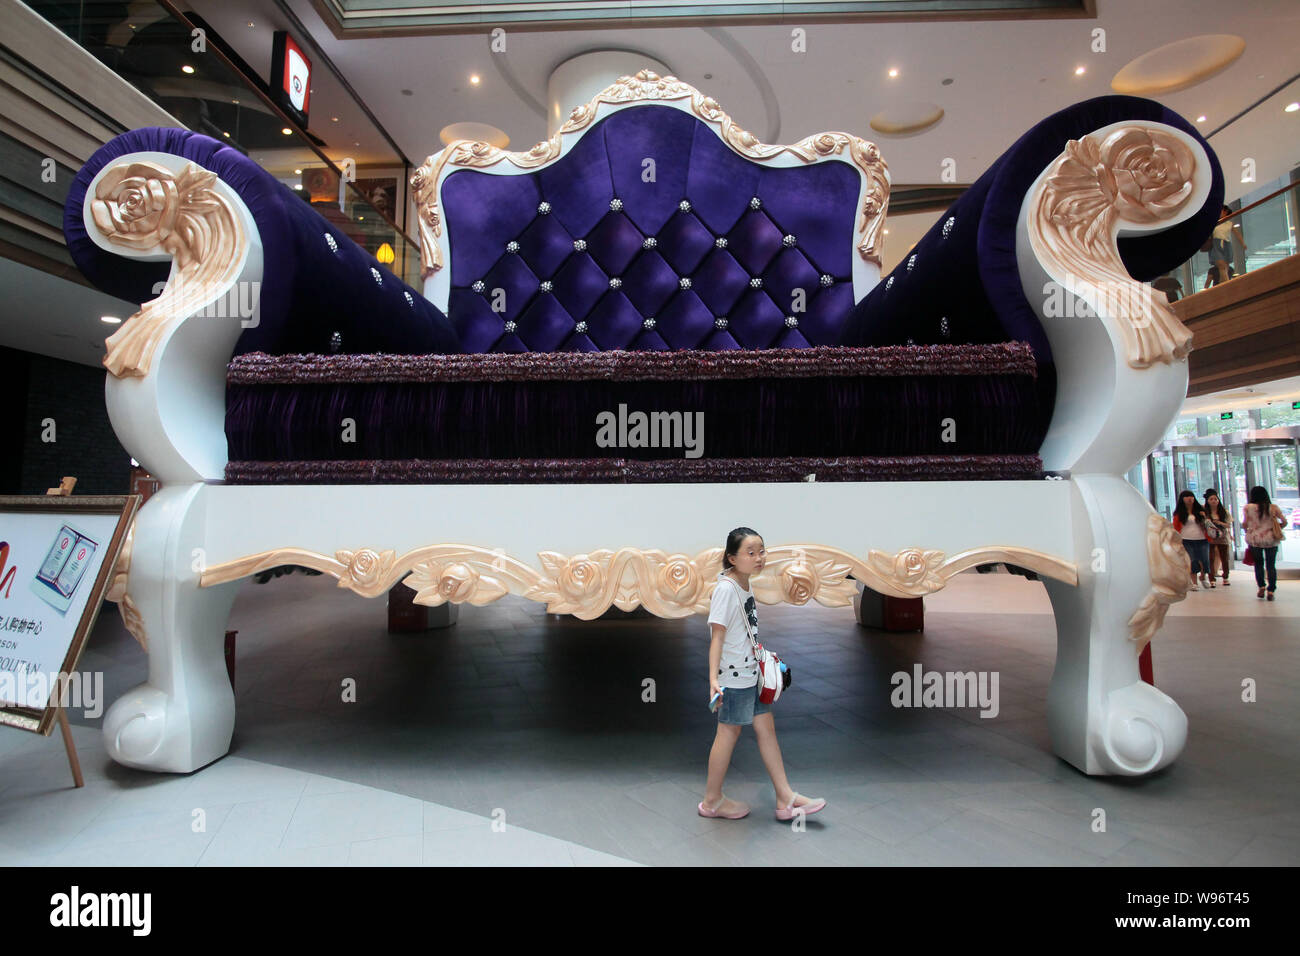 Shoppers walk past the worlds biggest sofa at a mall in Shanghai, China, 24  August 2012. A giant sofa has become a hotspot and attraction in downtow  Stock Photo - Alamy